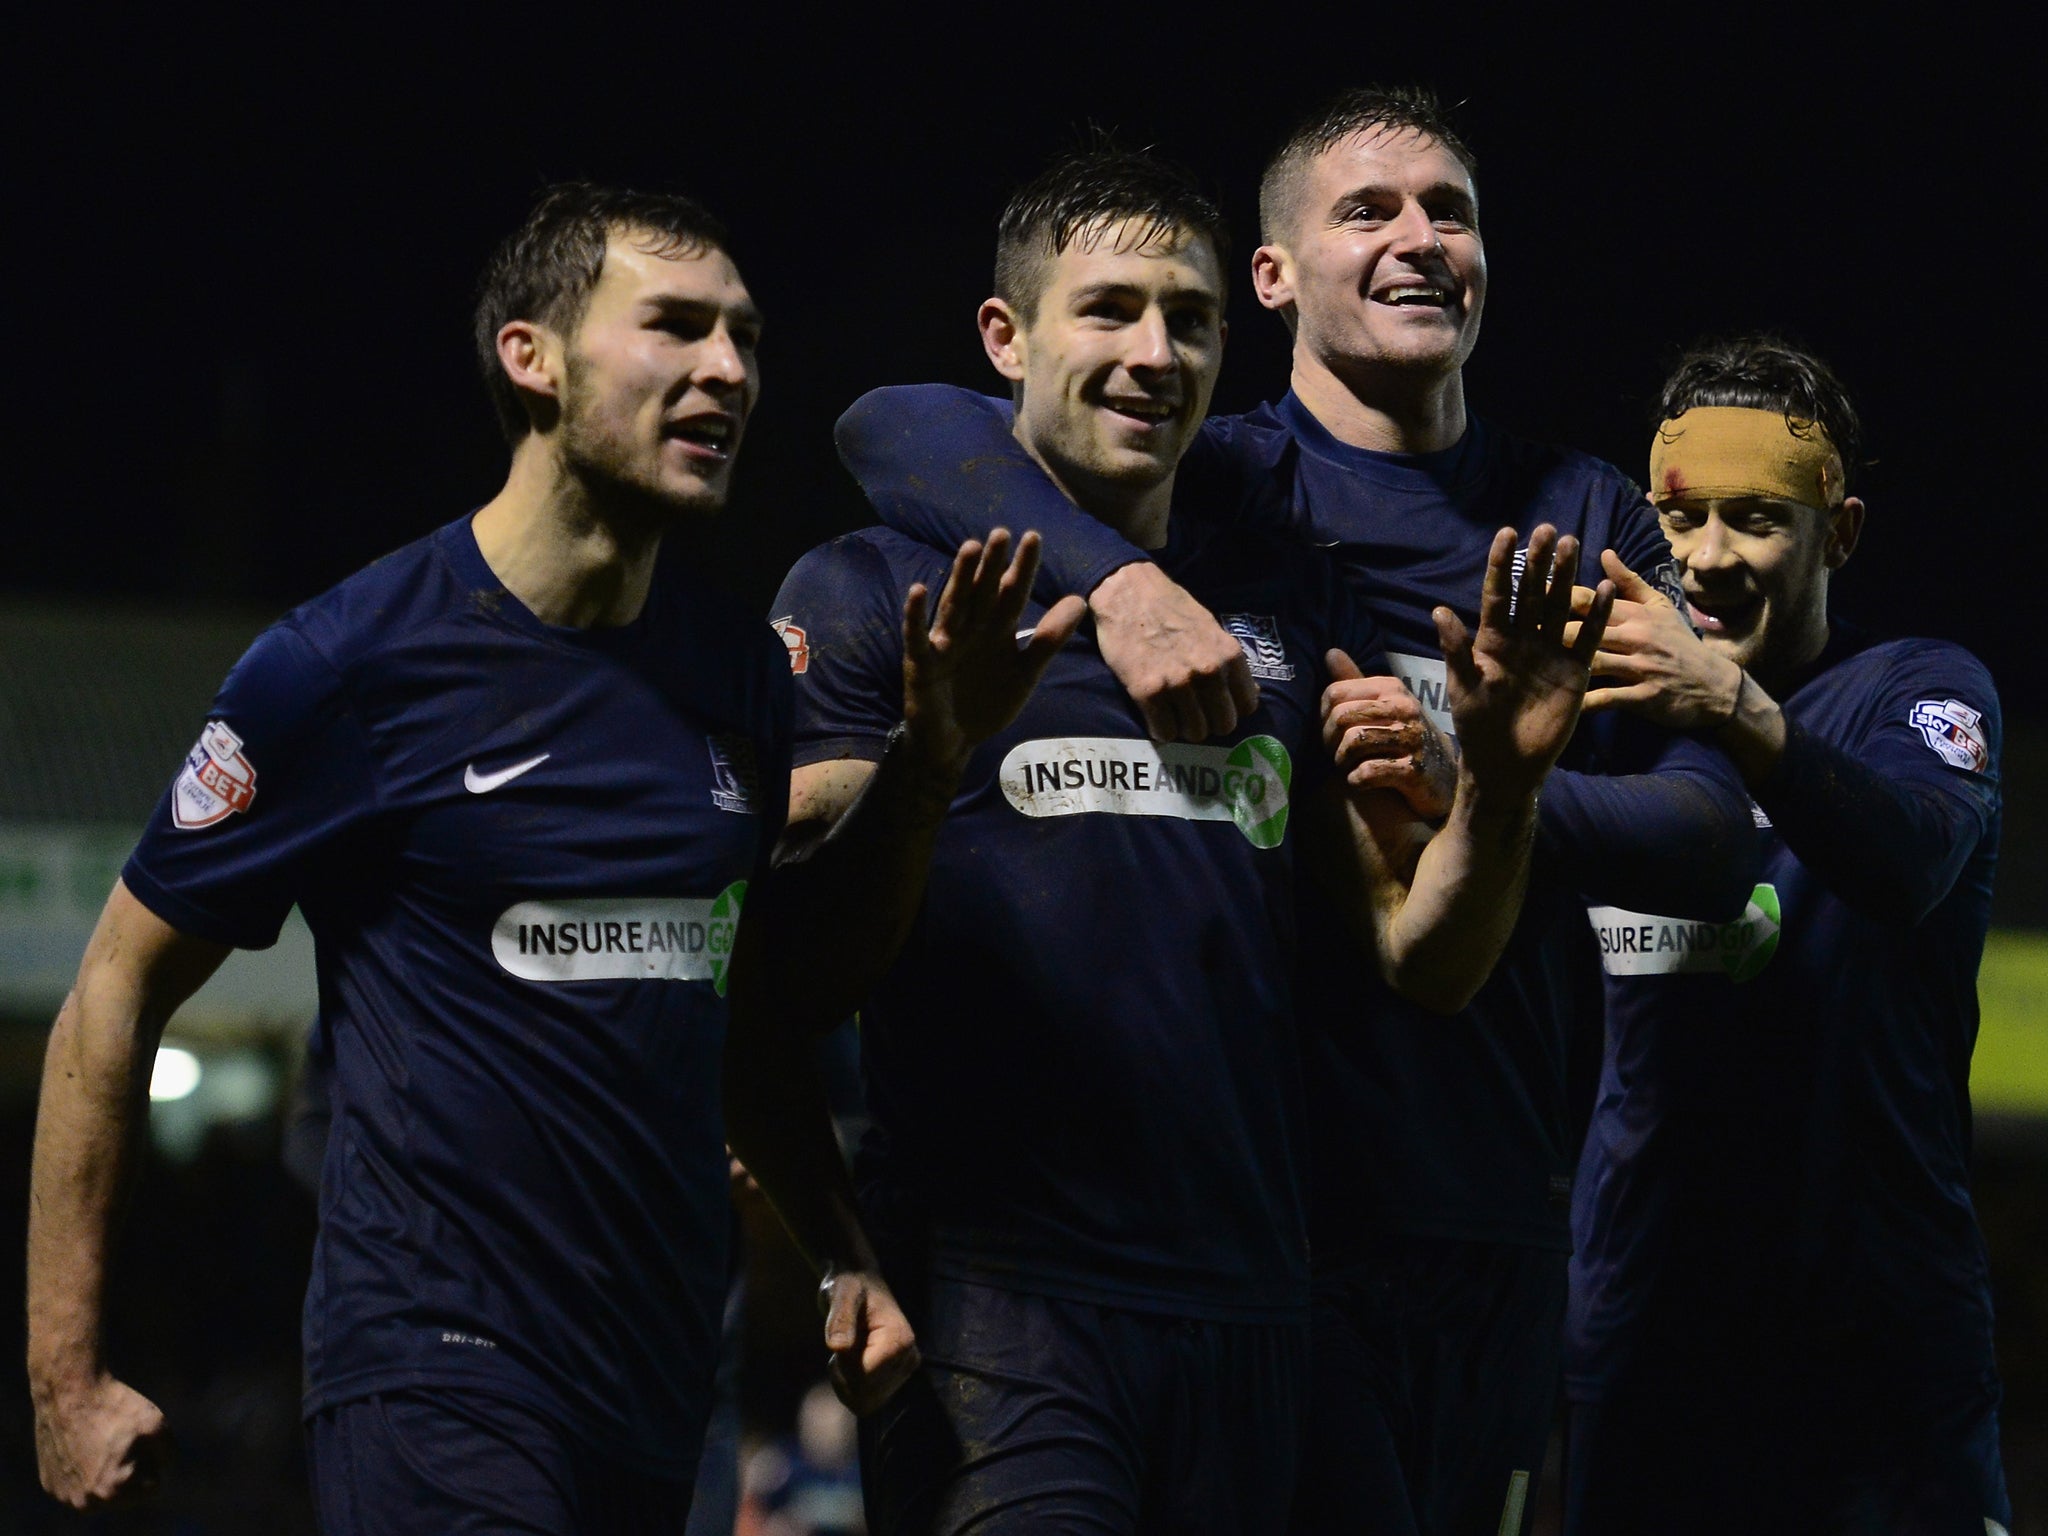 Southend players celebrate scoring against Millwall in their 4-1 victory